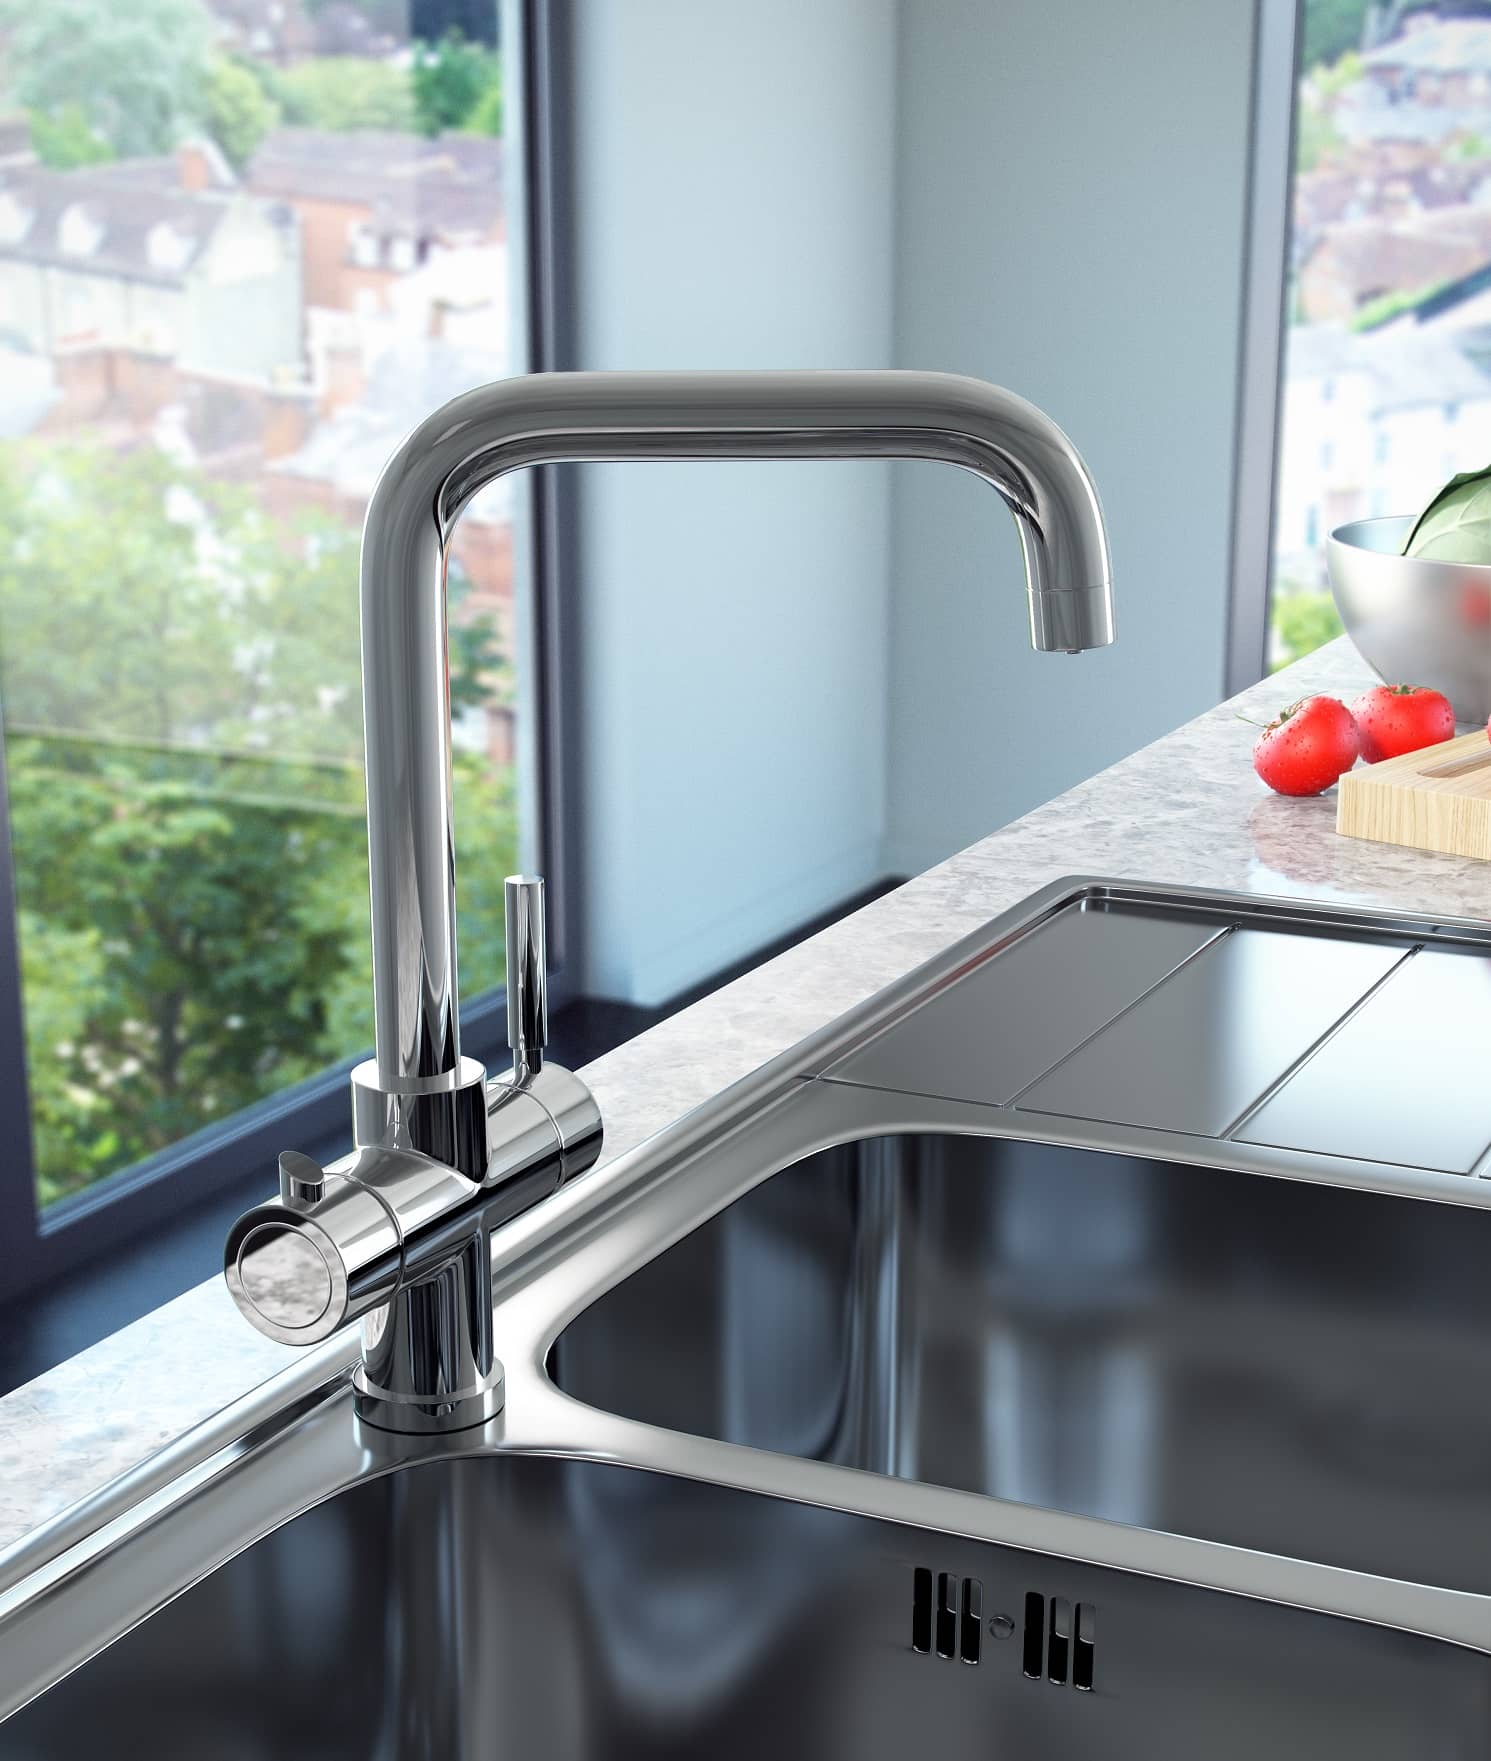 Why Every Kitchen Should Have a Boiling Water Tap